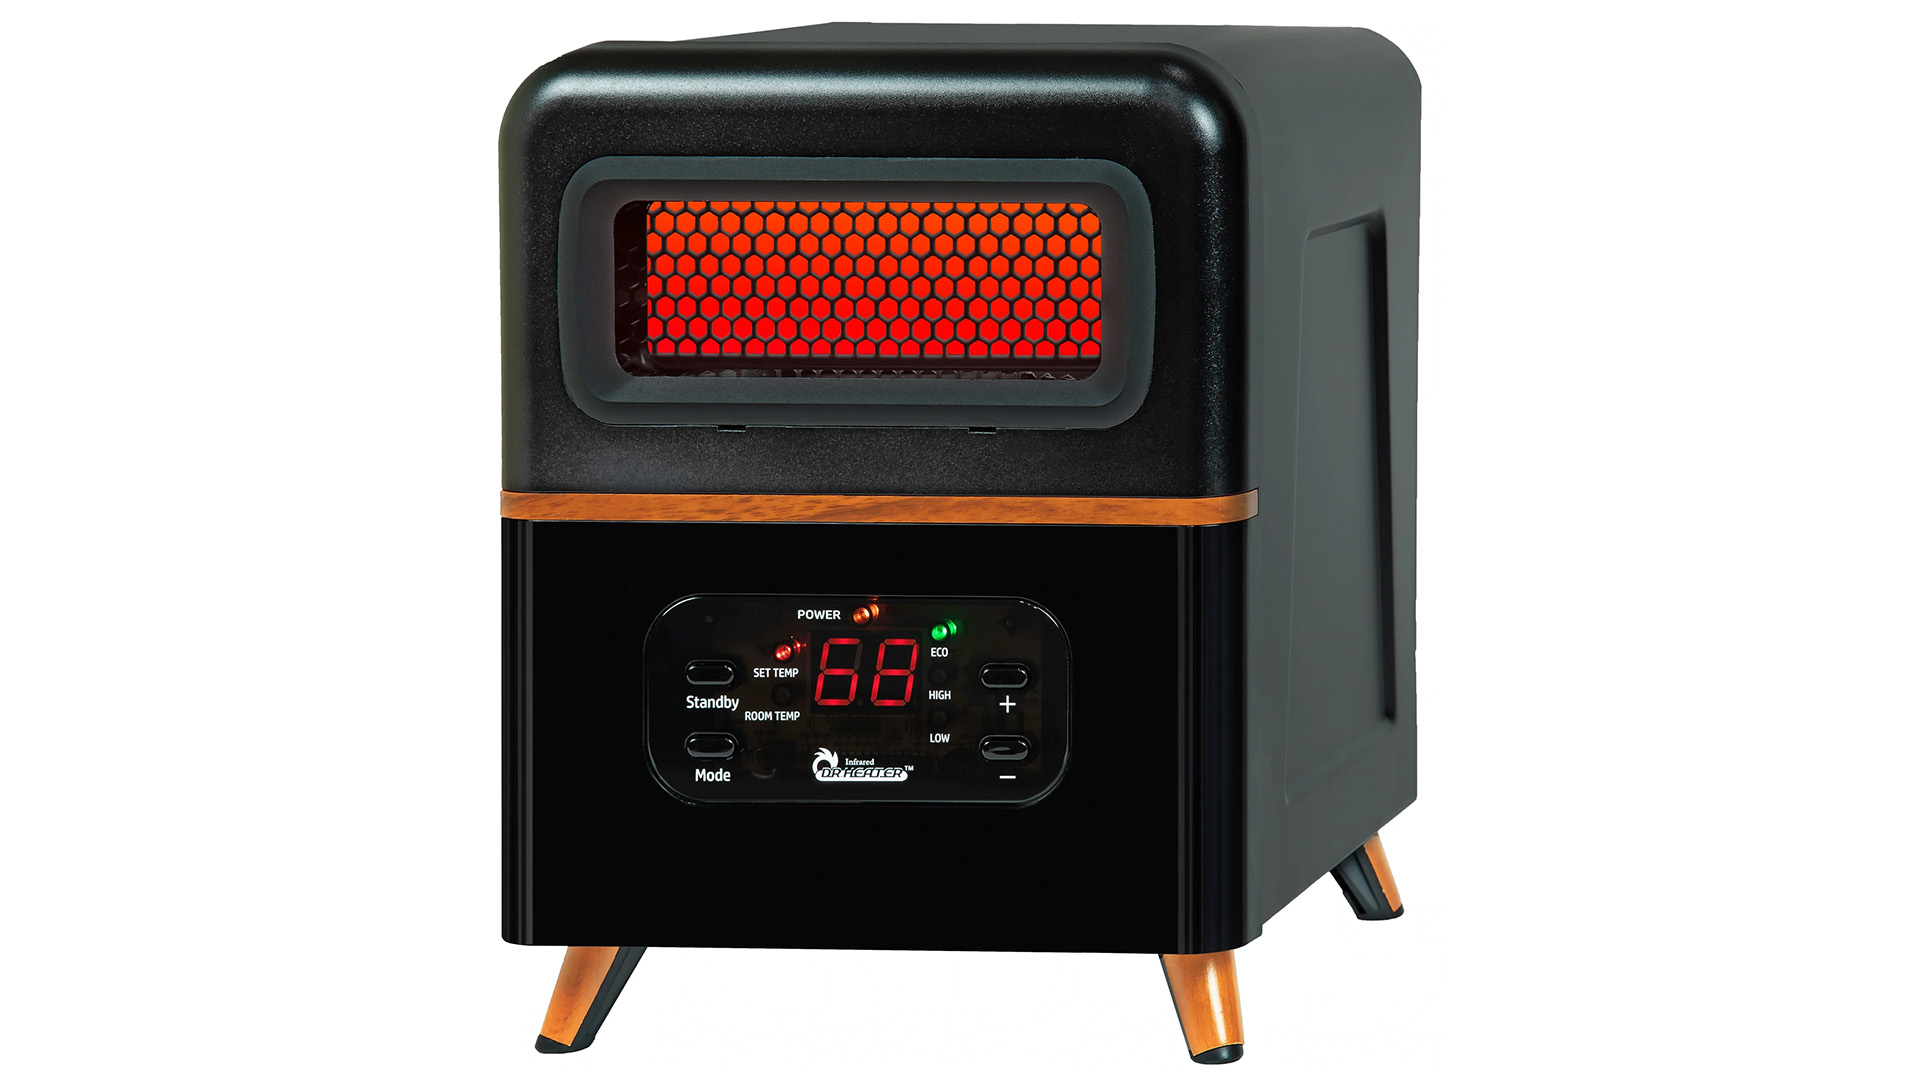 Dr. Infrared Heater Portable Space Heater Review